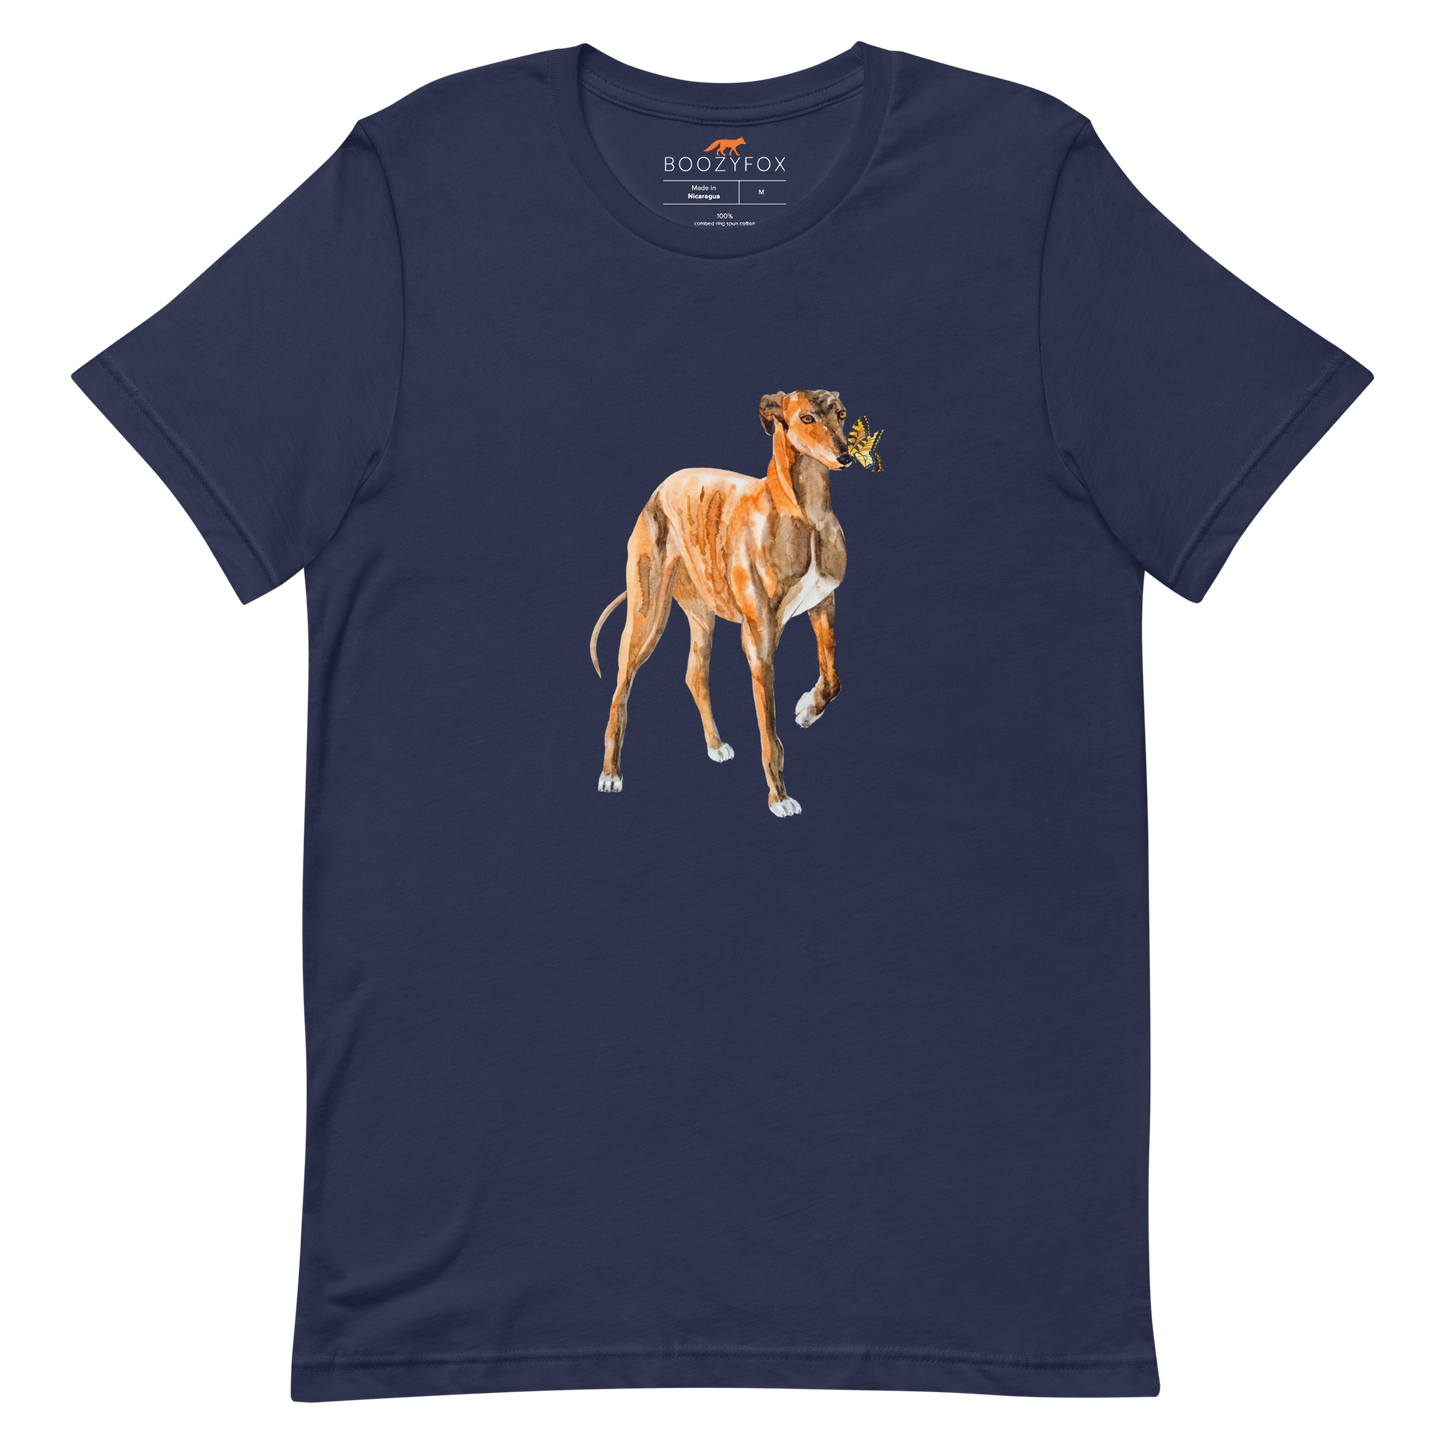 Navy Premium Greyhound T-Shirt featuring an adorable Greyhound And Butterfly graphic on the chest - Cute Graphic Greyhound Tees - Boozy Fox